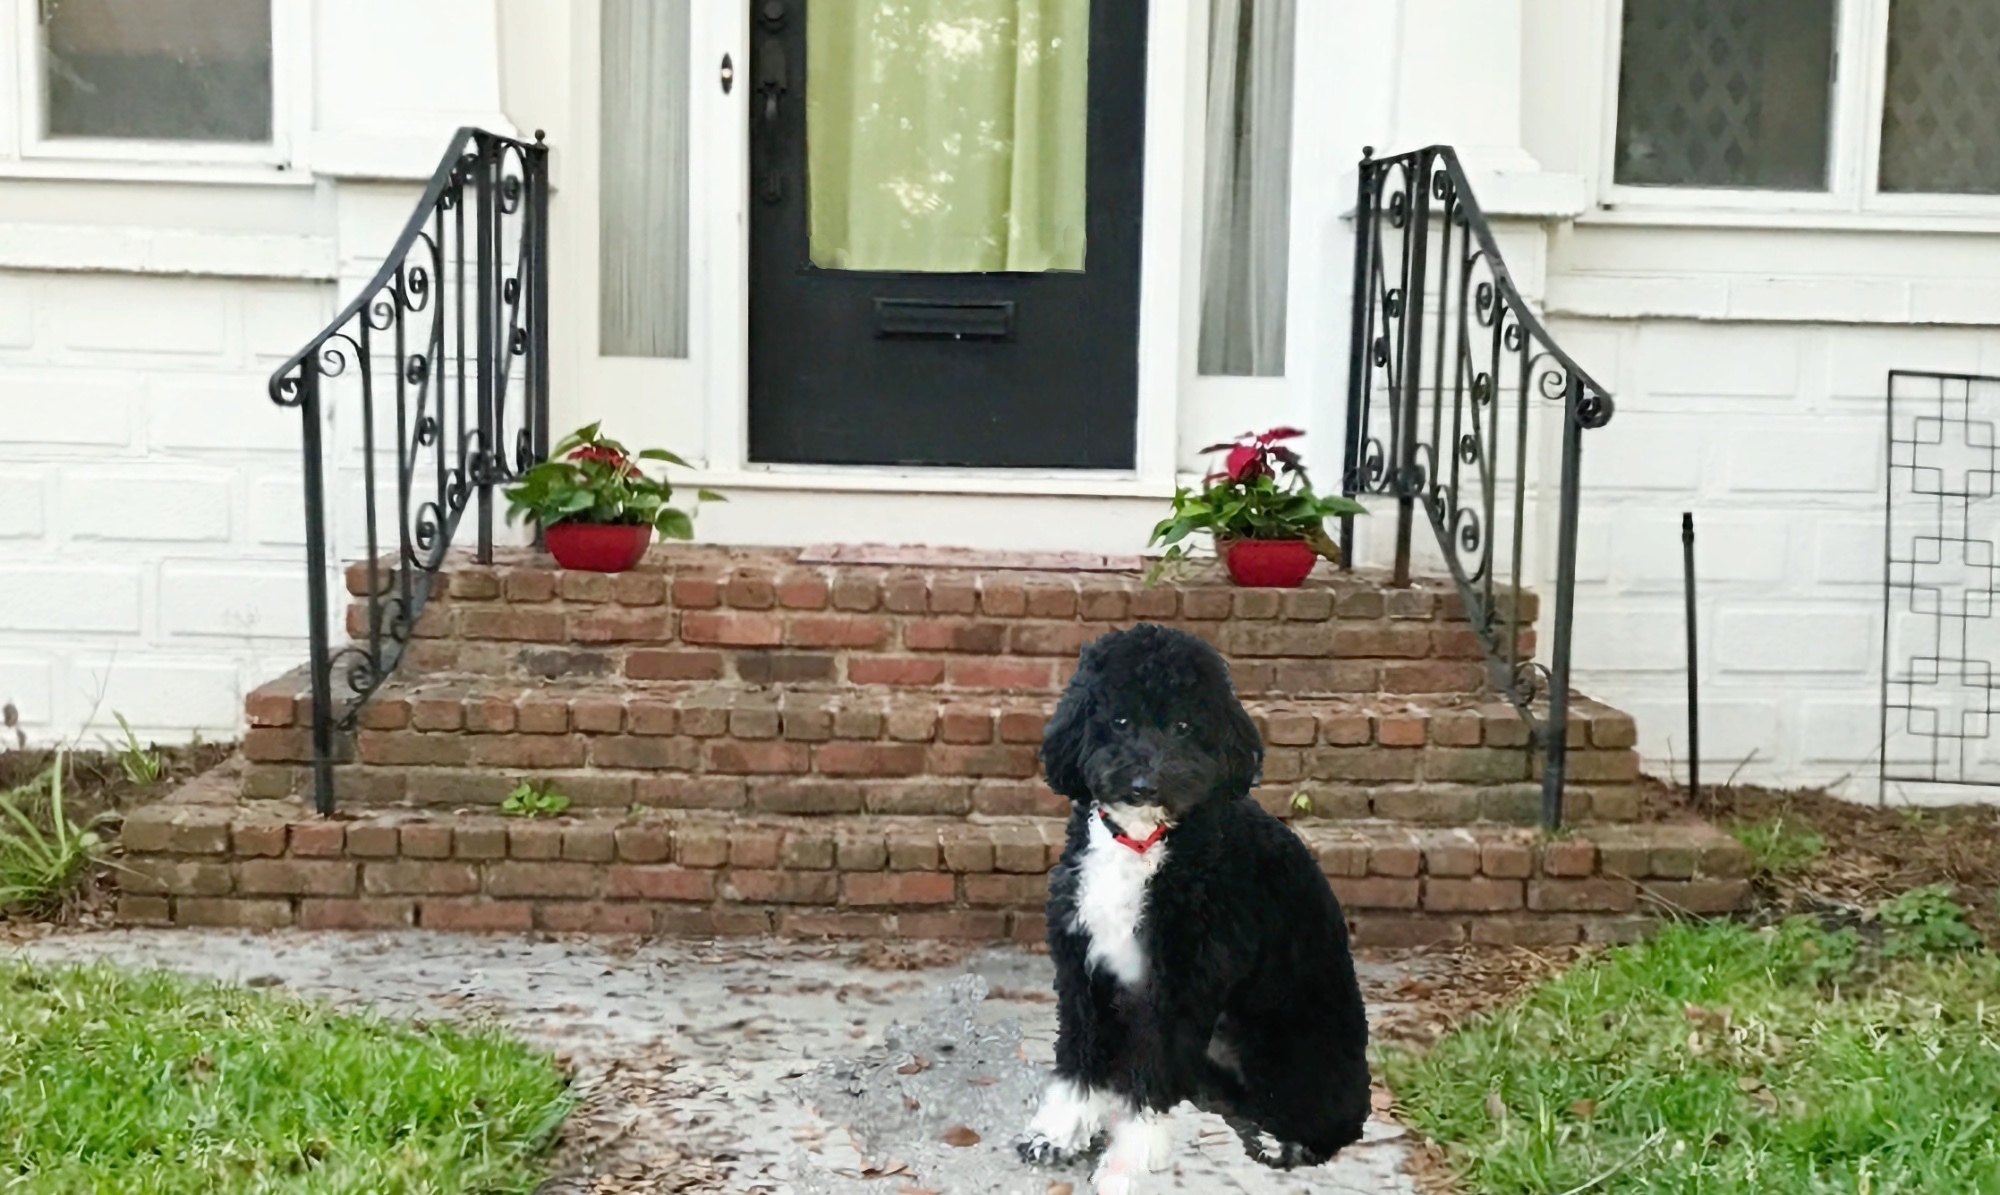 A black dog with white chest and paws sits in front of a White House with a brick steps